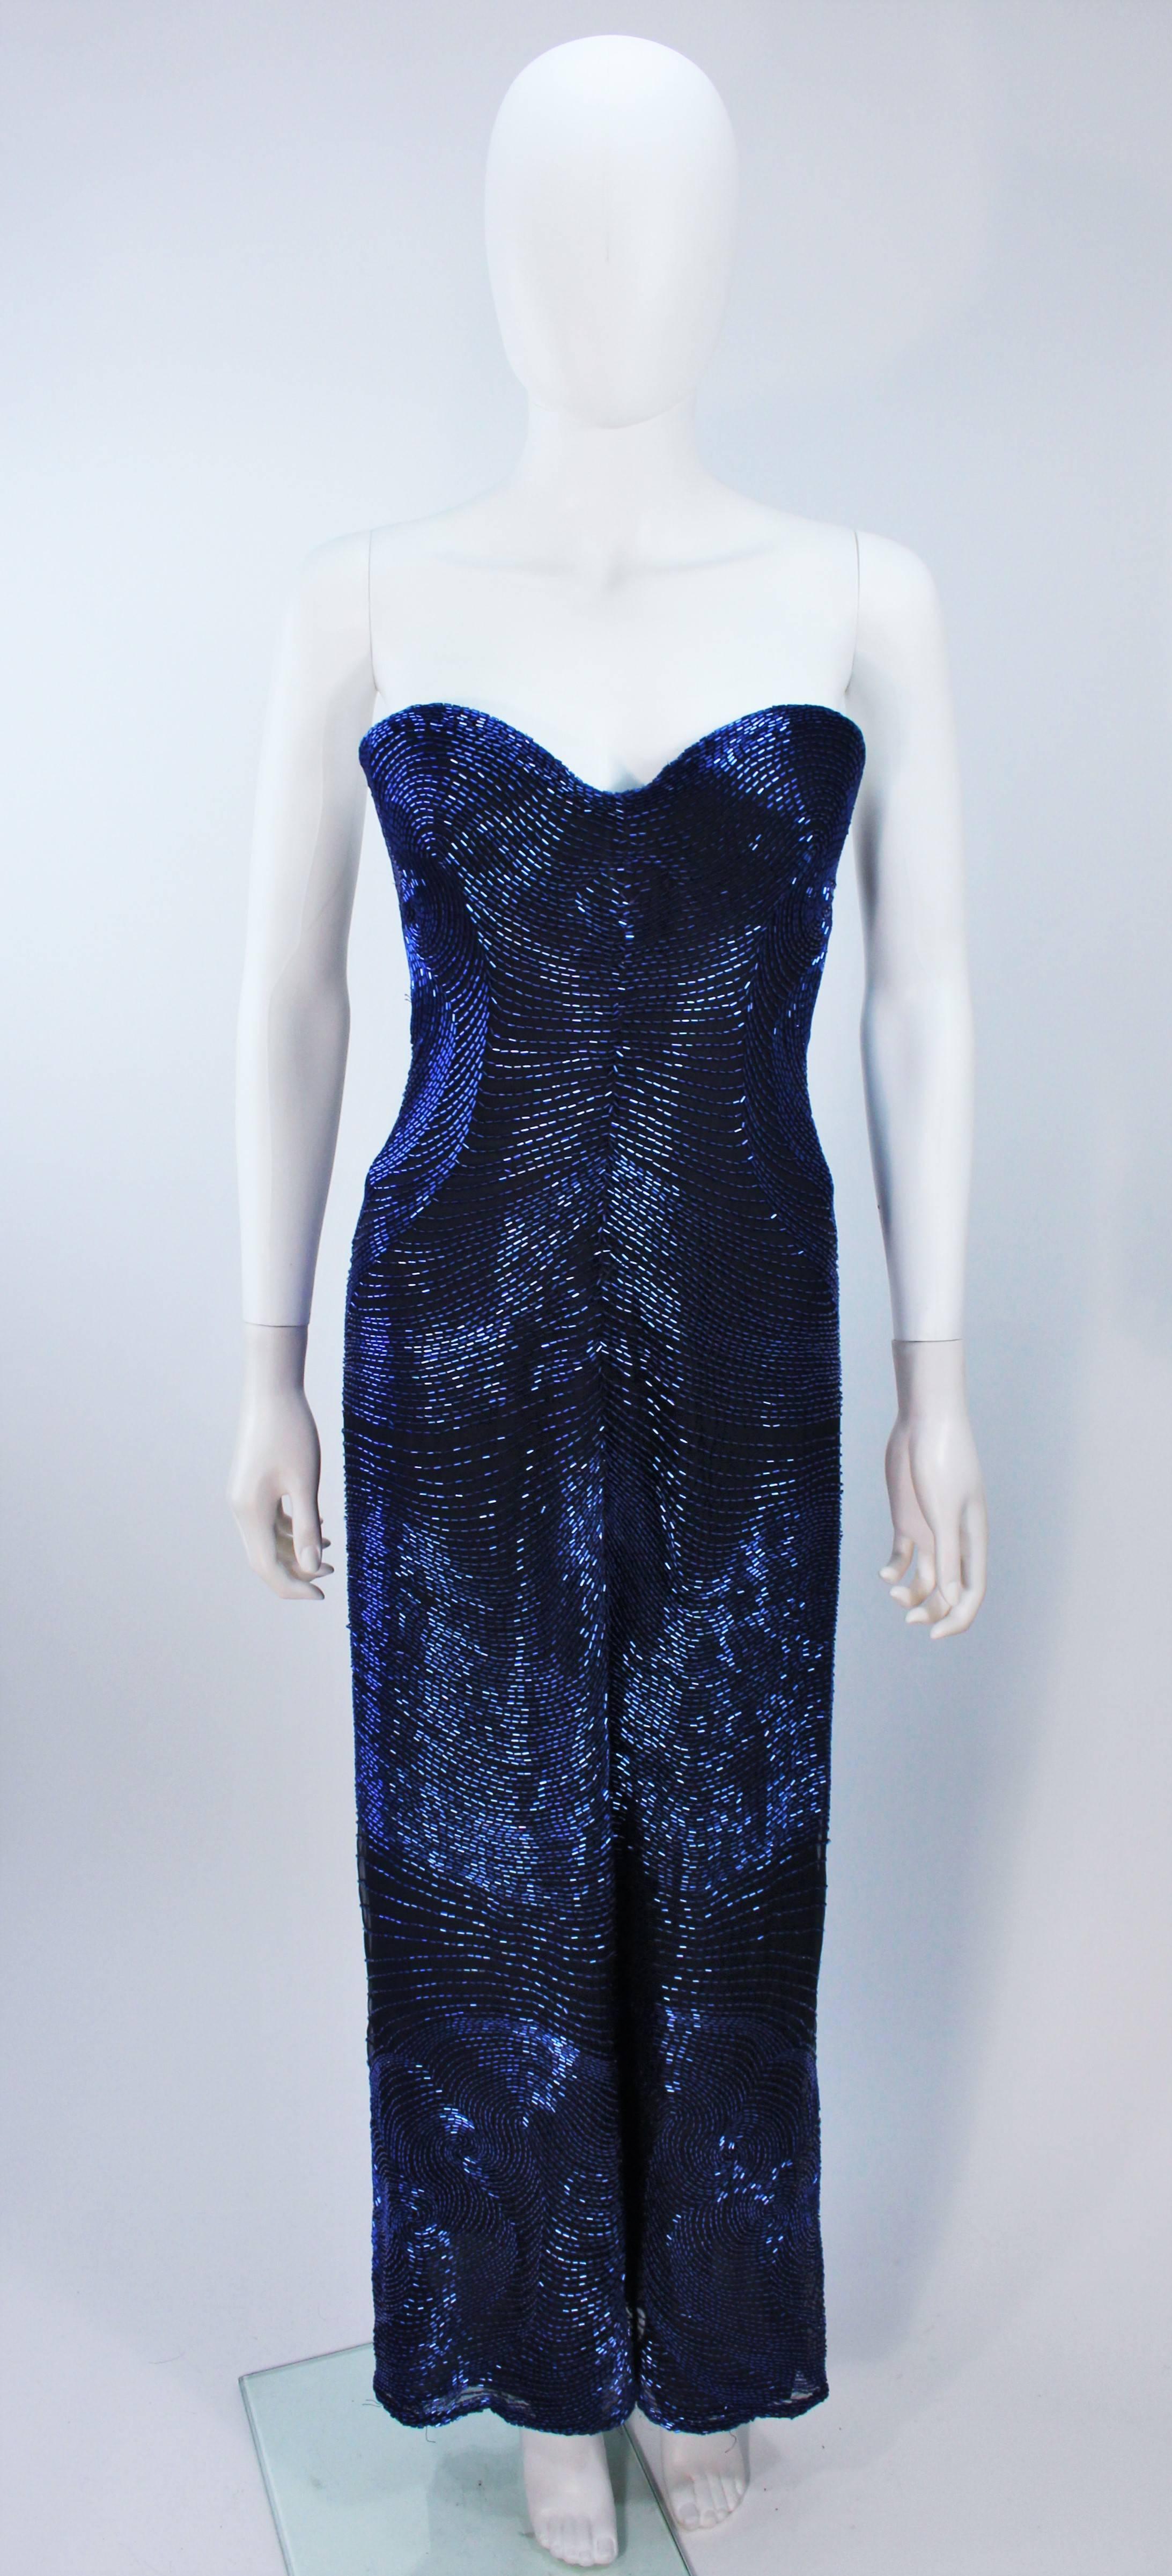  This Halston dress is composed of a beautifully beaded black silk with cobalt blue beading. The strapless style features sweetheart neckline with a center front slit. There is a center back zipper closure, and interior boned bustier foundation. In